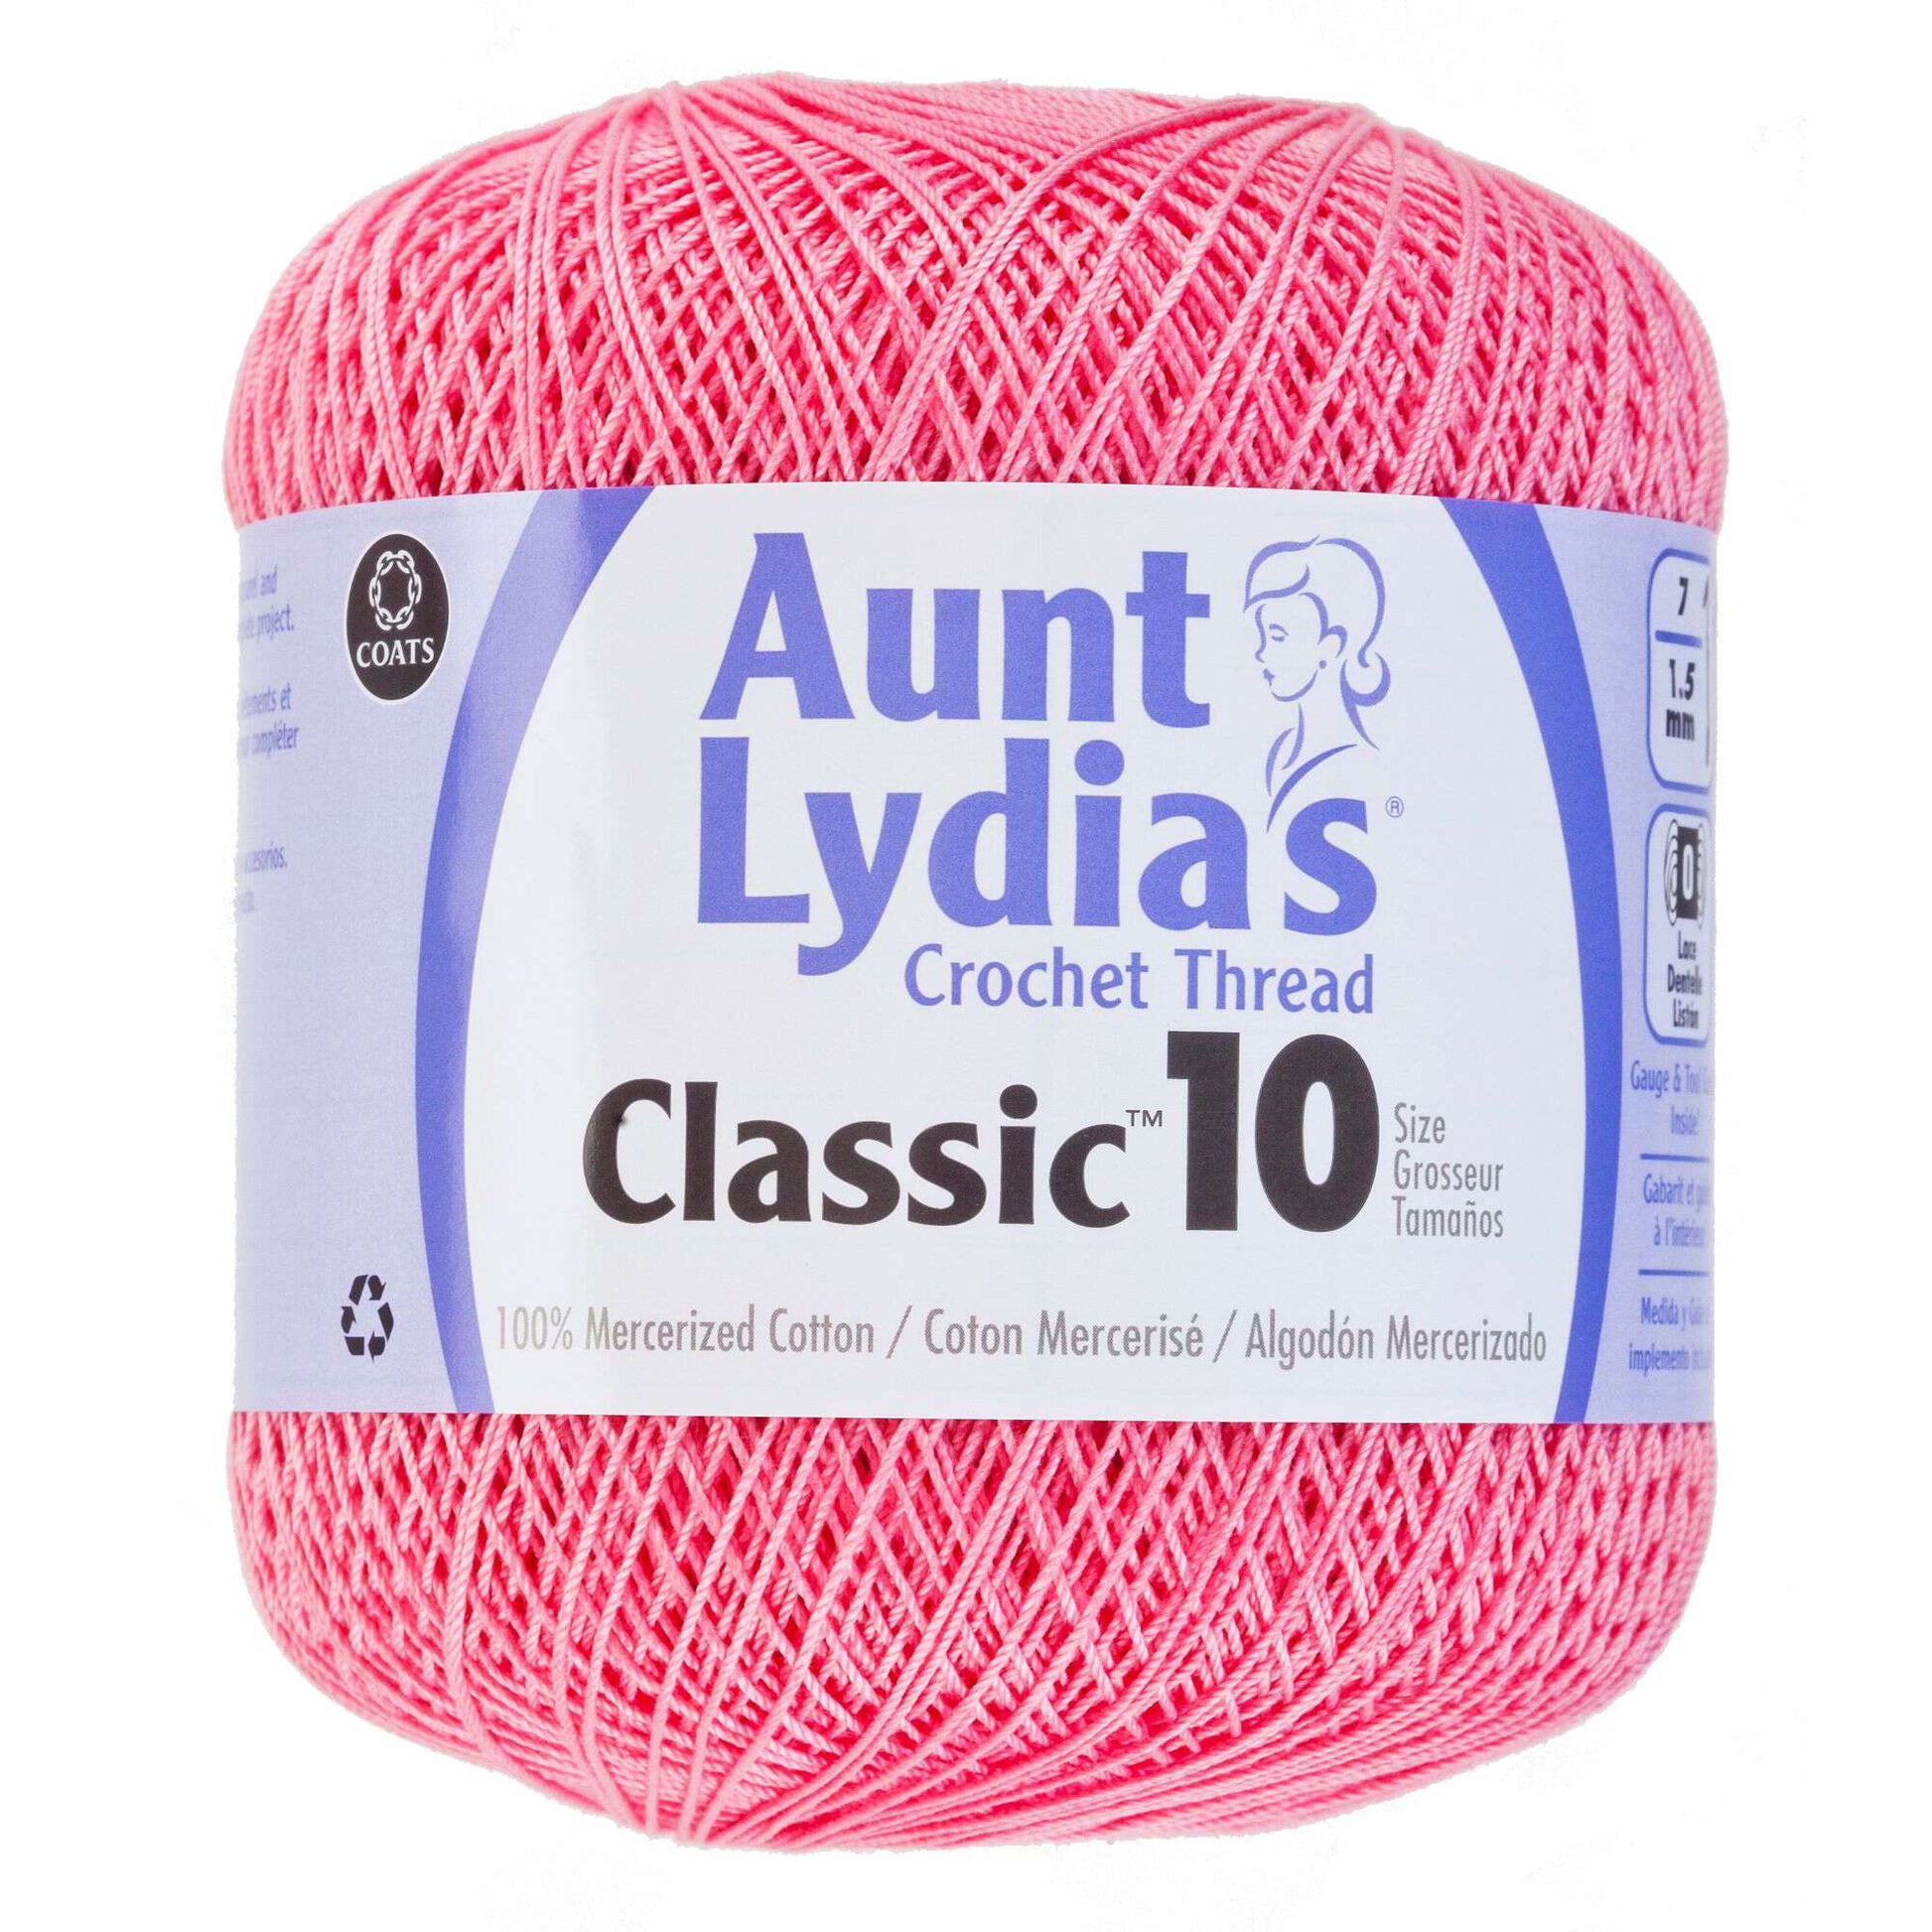 Aunt Lydia's Classic Crochet Thread Size 10 - Clearance shades French Rose